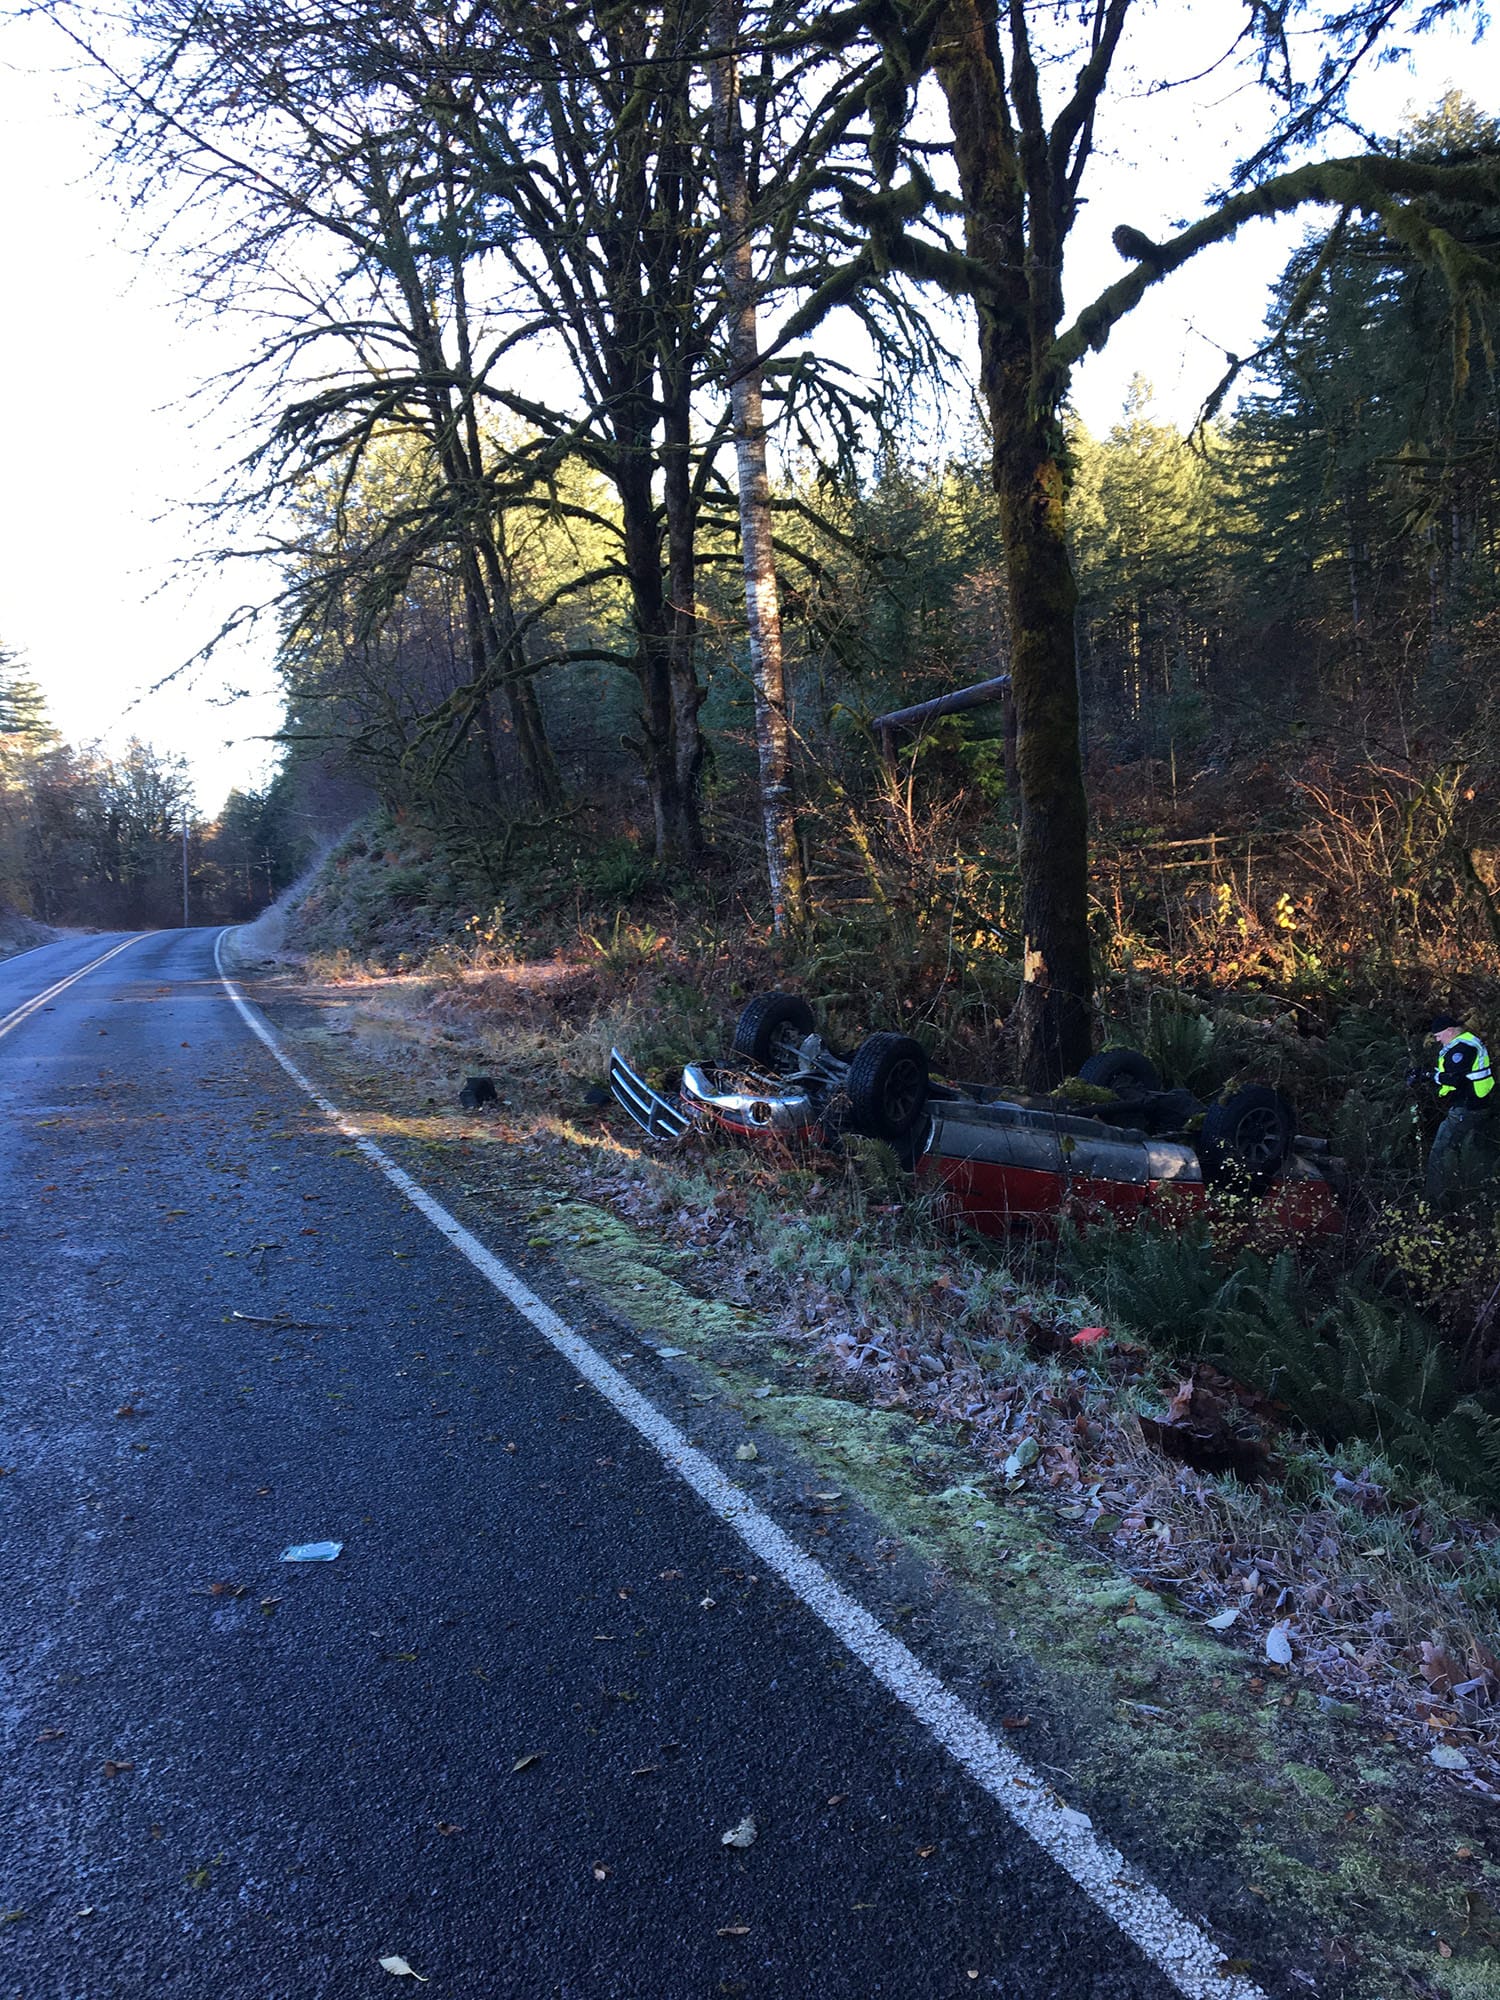 The aftermath of a fatal crash Monday morning on Northeast Kelly Road near Yacolt. The driver and lone occupant, a 17-year-old boy, was killed.